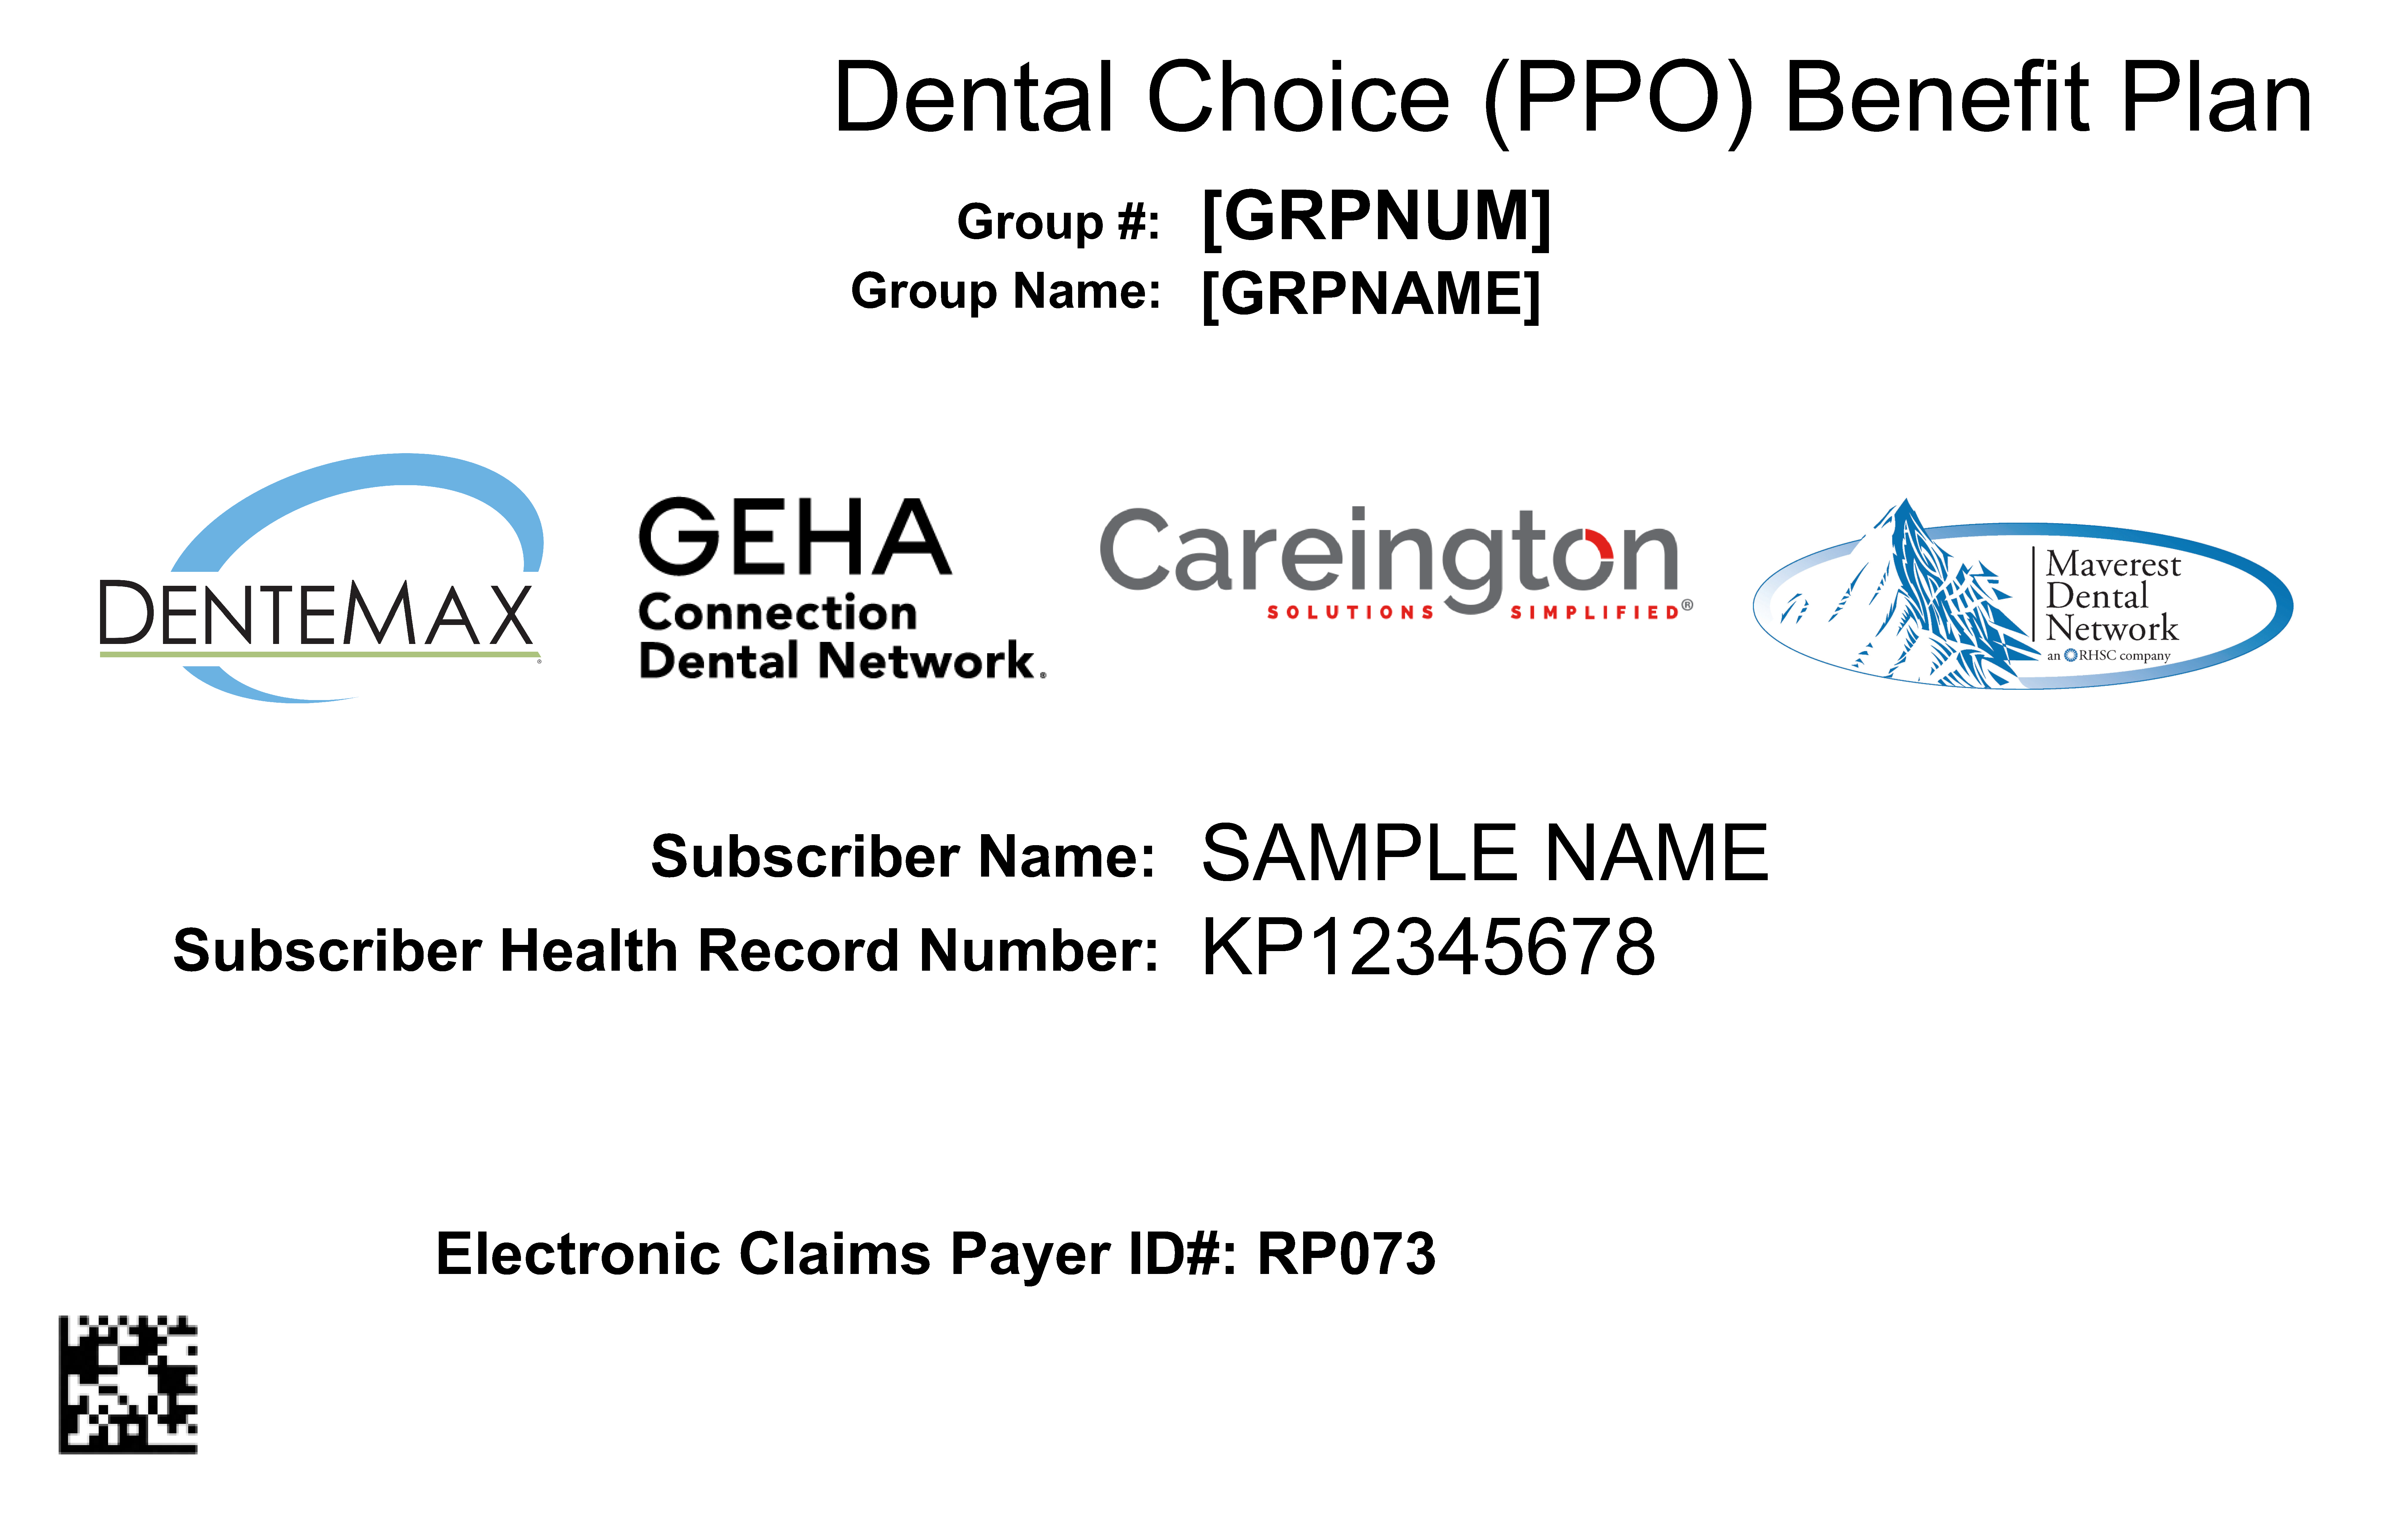 Dental insurance card for people outside the Kaiser service area